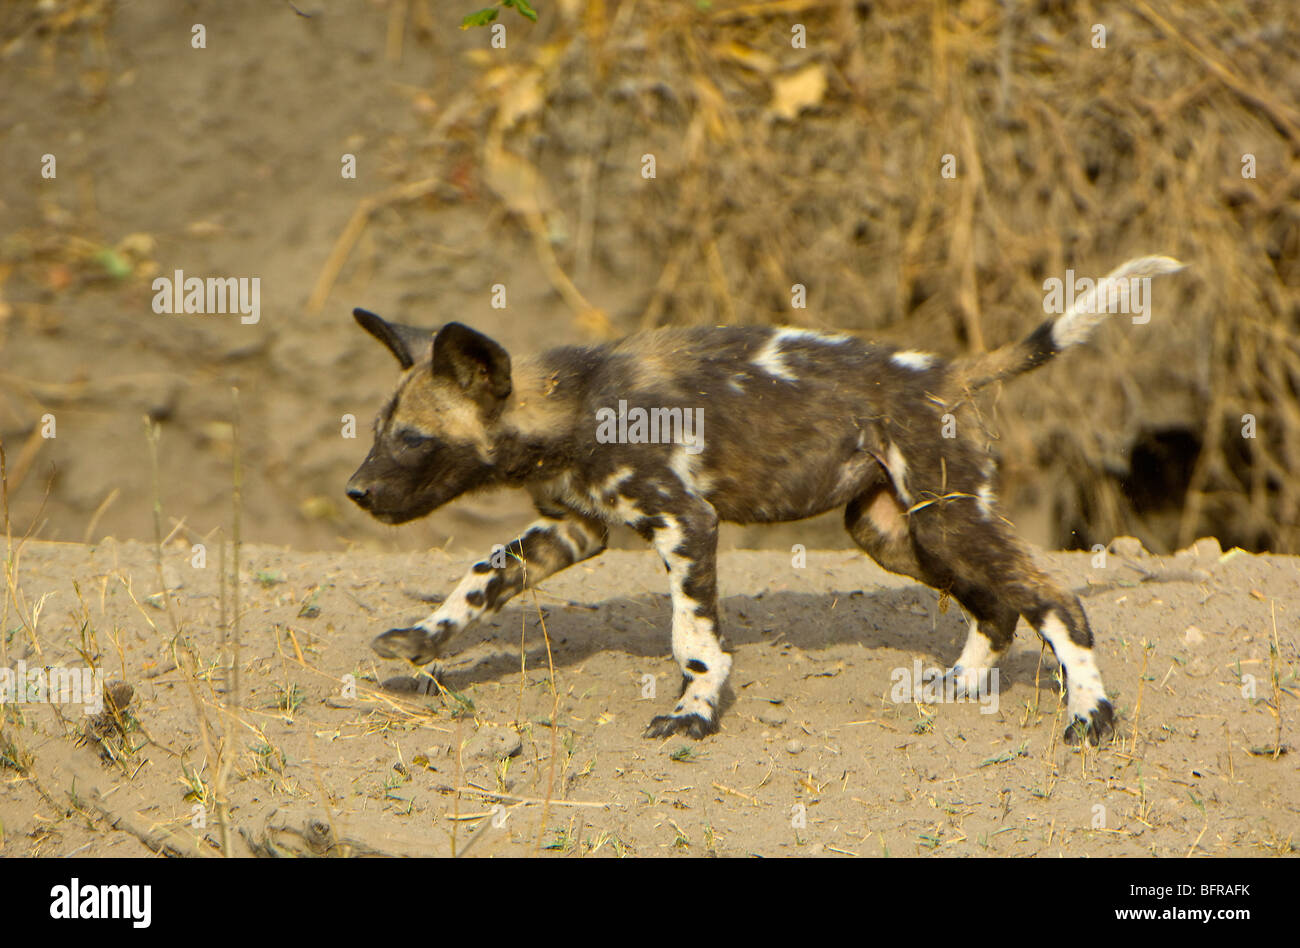 African Wild Dog pup (Lycaon pictus) running Stock Photo